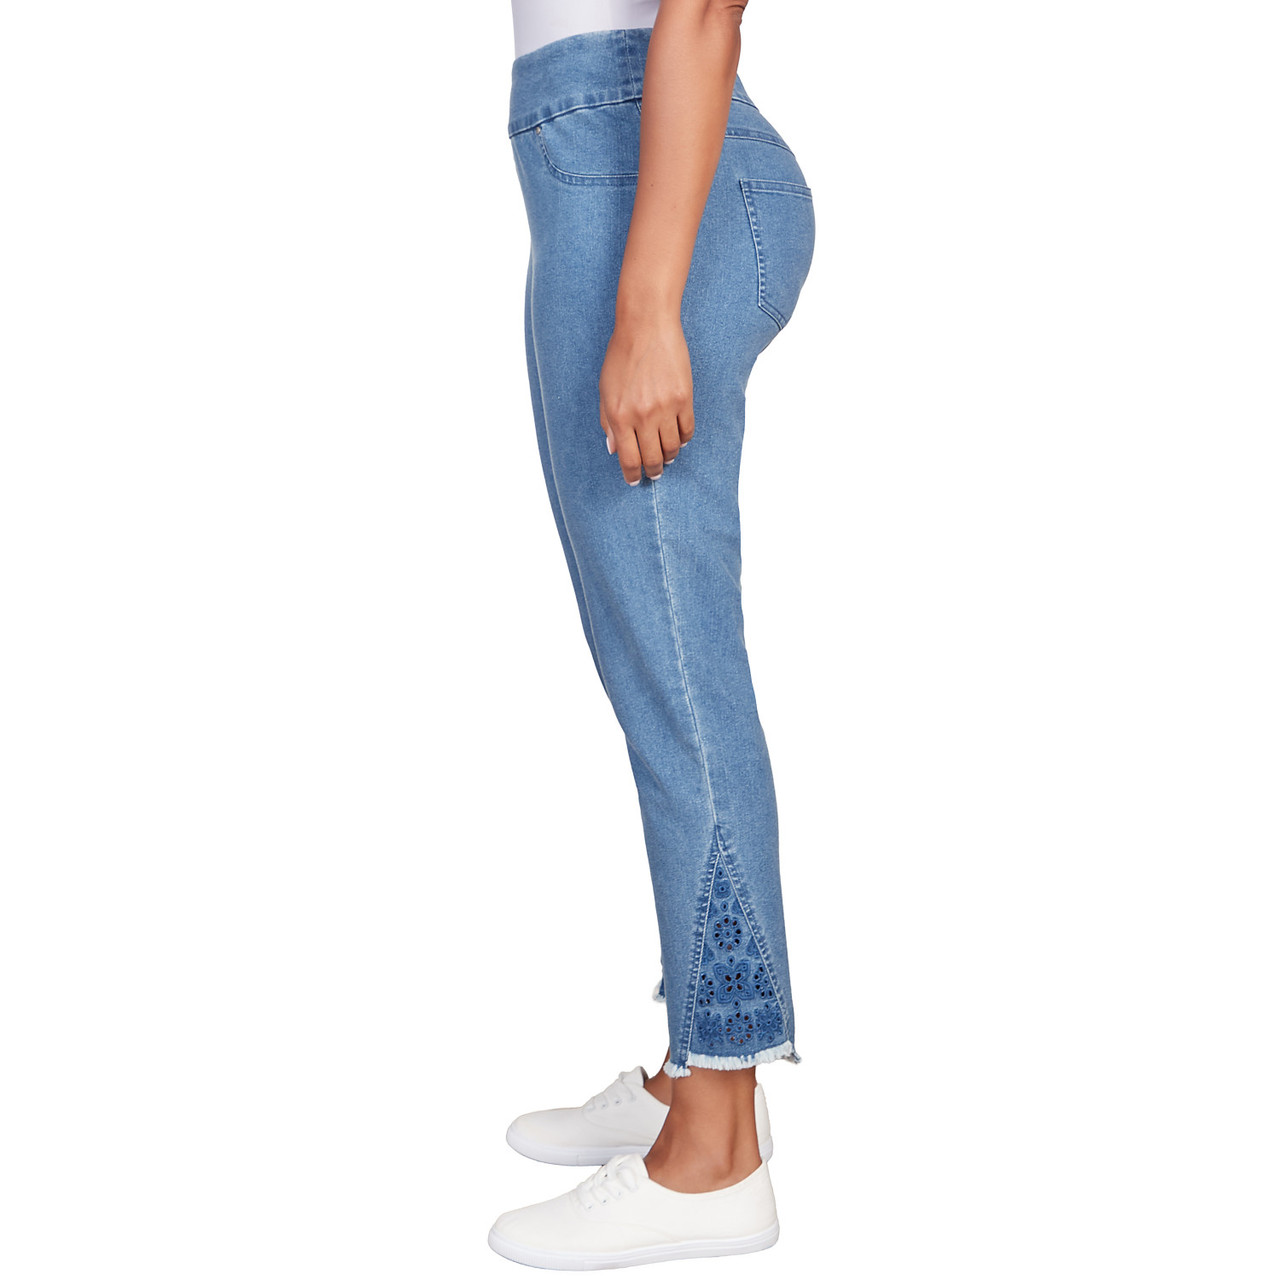 Plus Women's Embroidered Ankle Pull On Stretch Denim Jeans